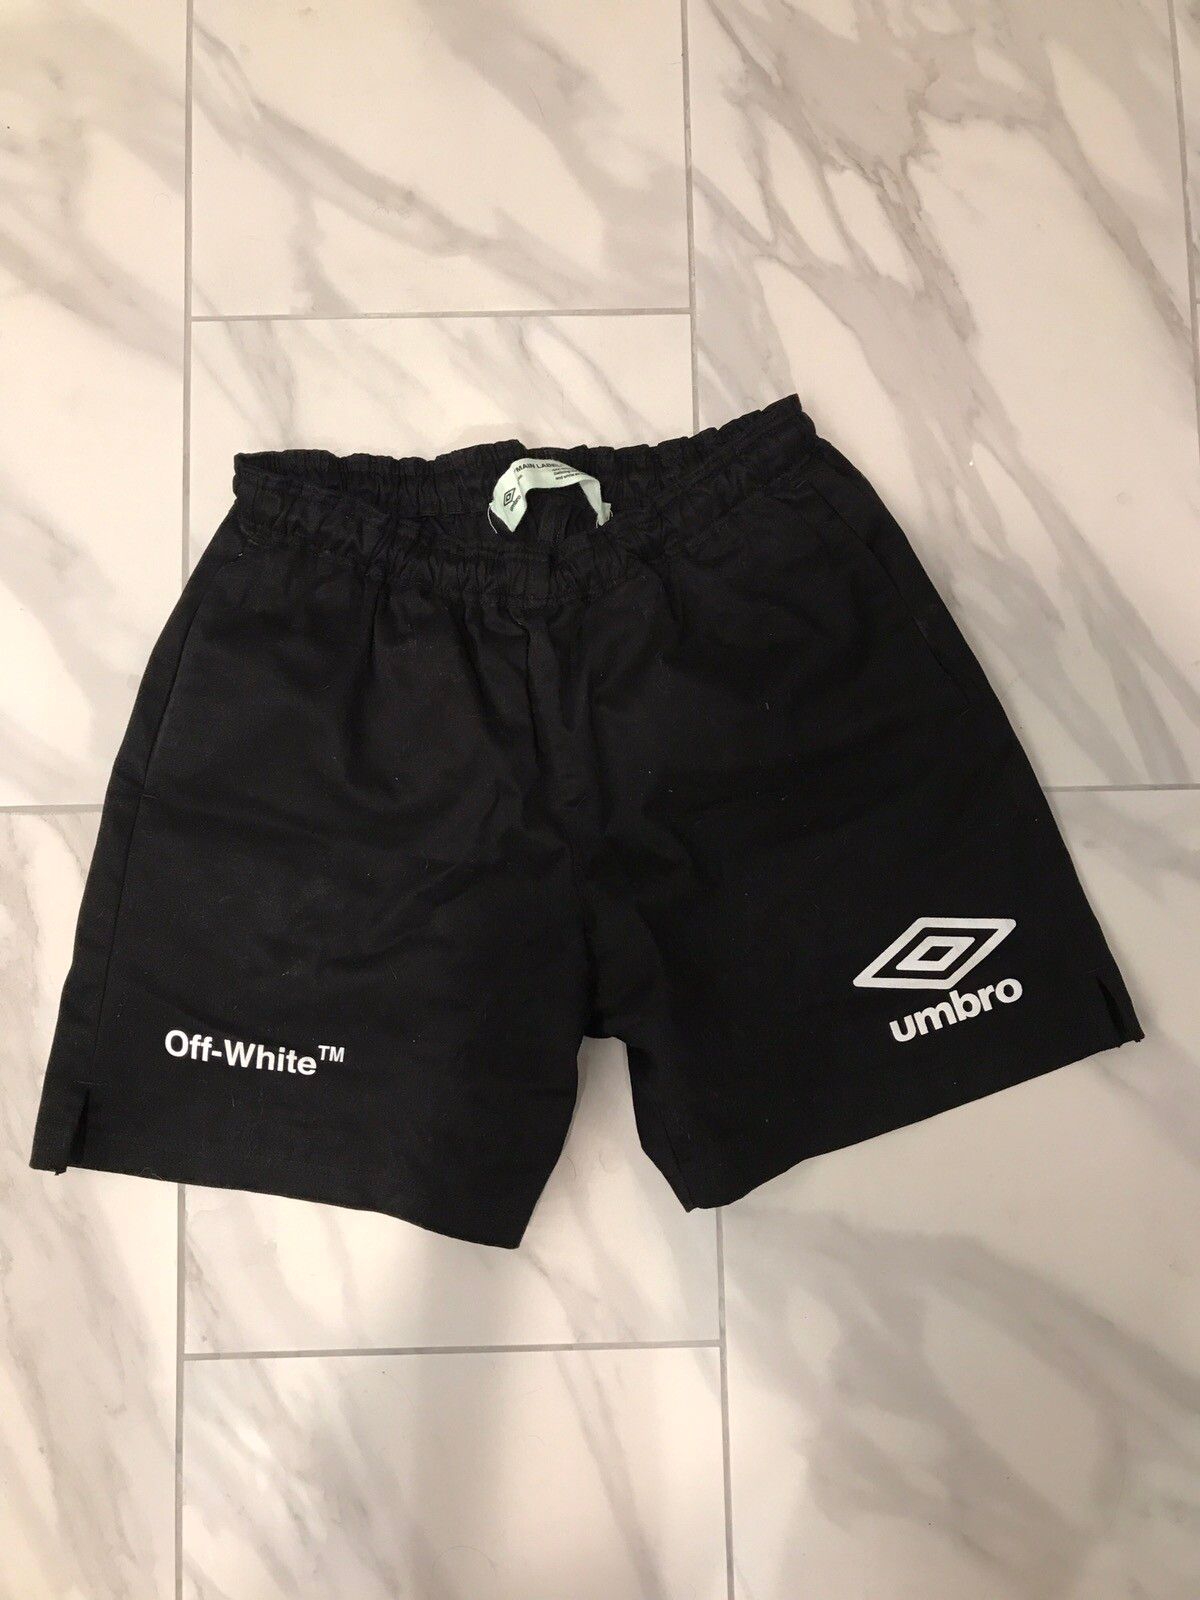 Off-White Off-White X Umbro Shorts Size US 31 - 1 Preview